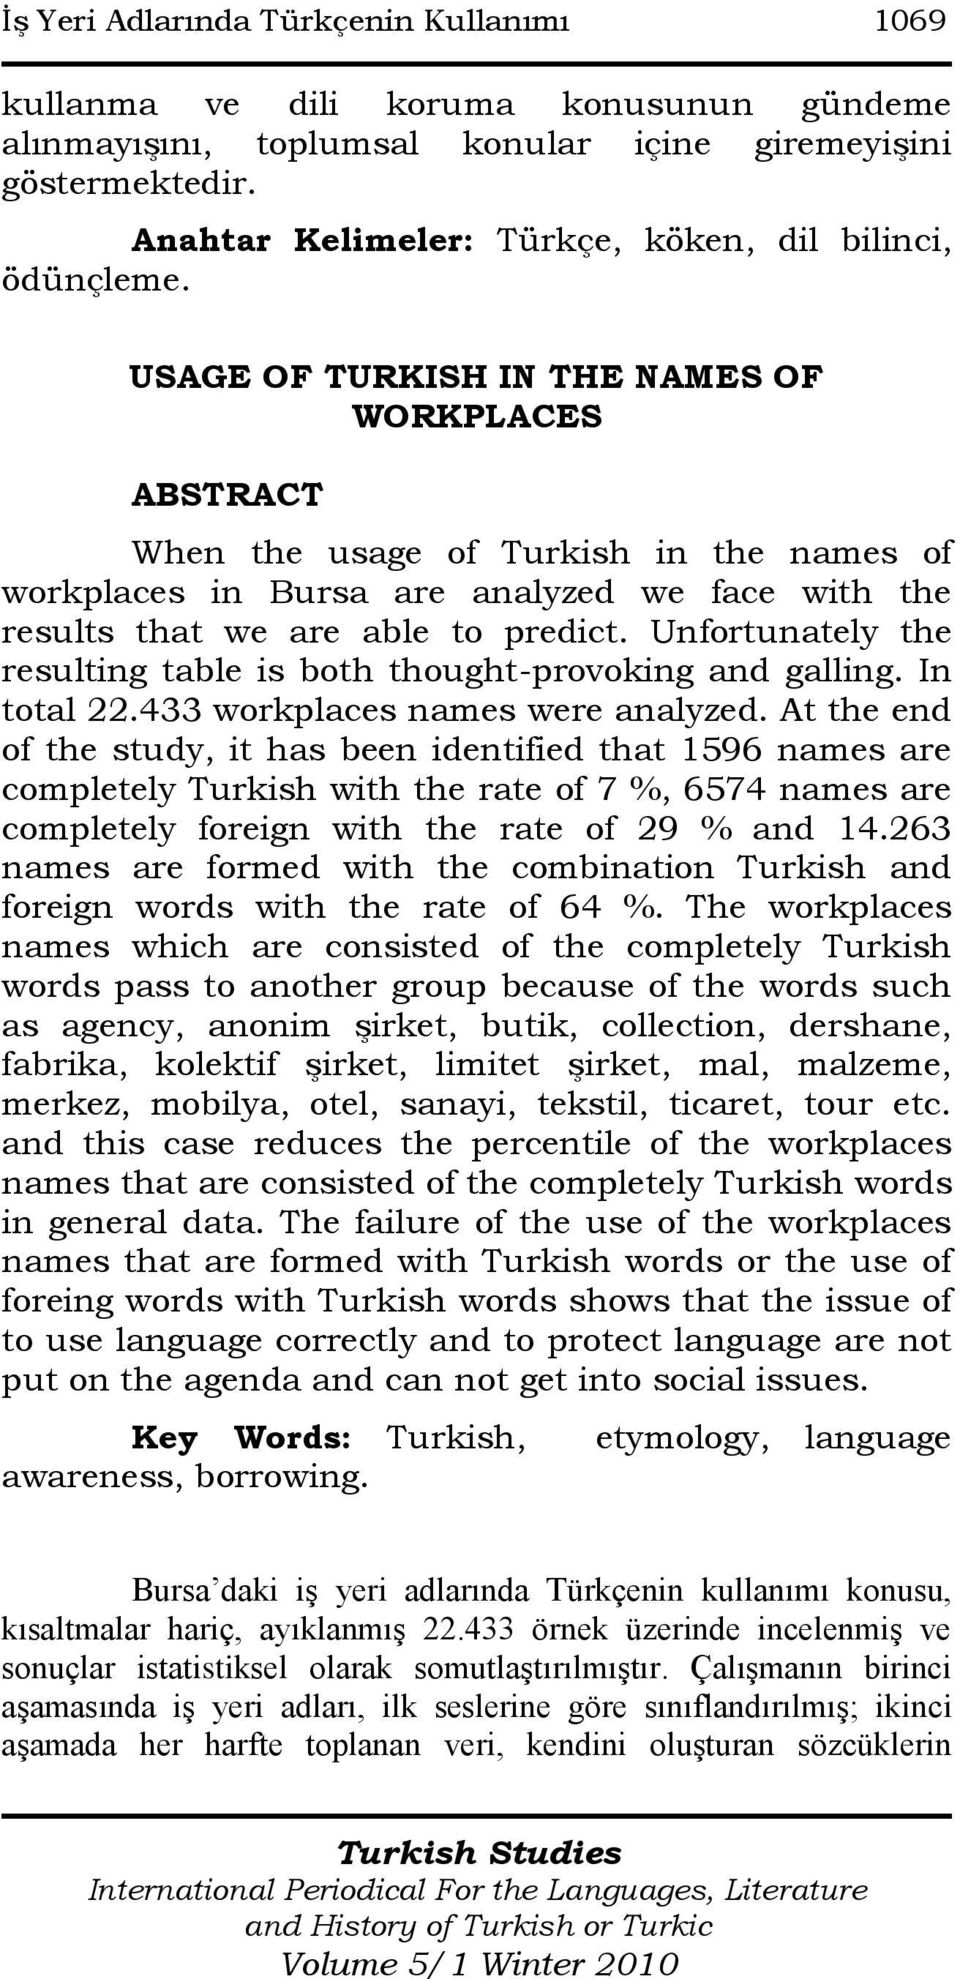 USAGE OF TURKISH IN THE NAMES OF WORKPLACES ABSTRACT When the usage of Turkish in the names of workplaces in Bursa are analyzed we face with the results that we are able to predict.